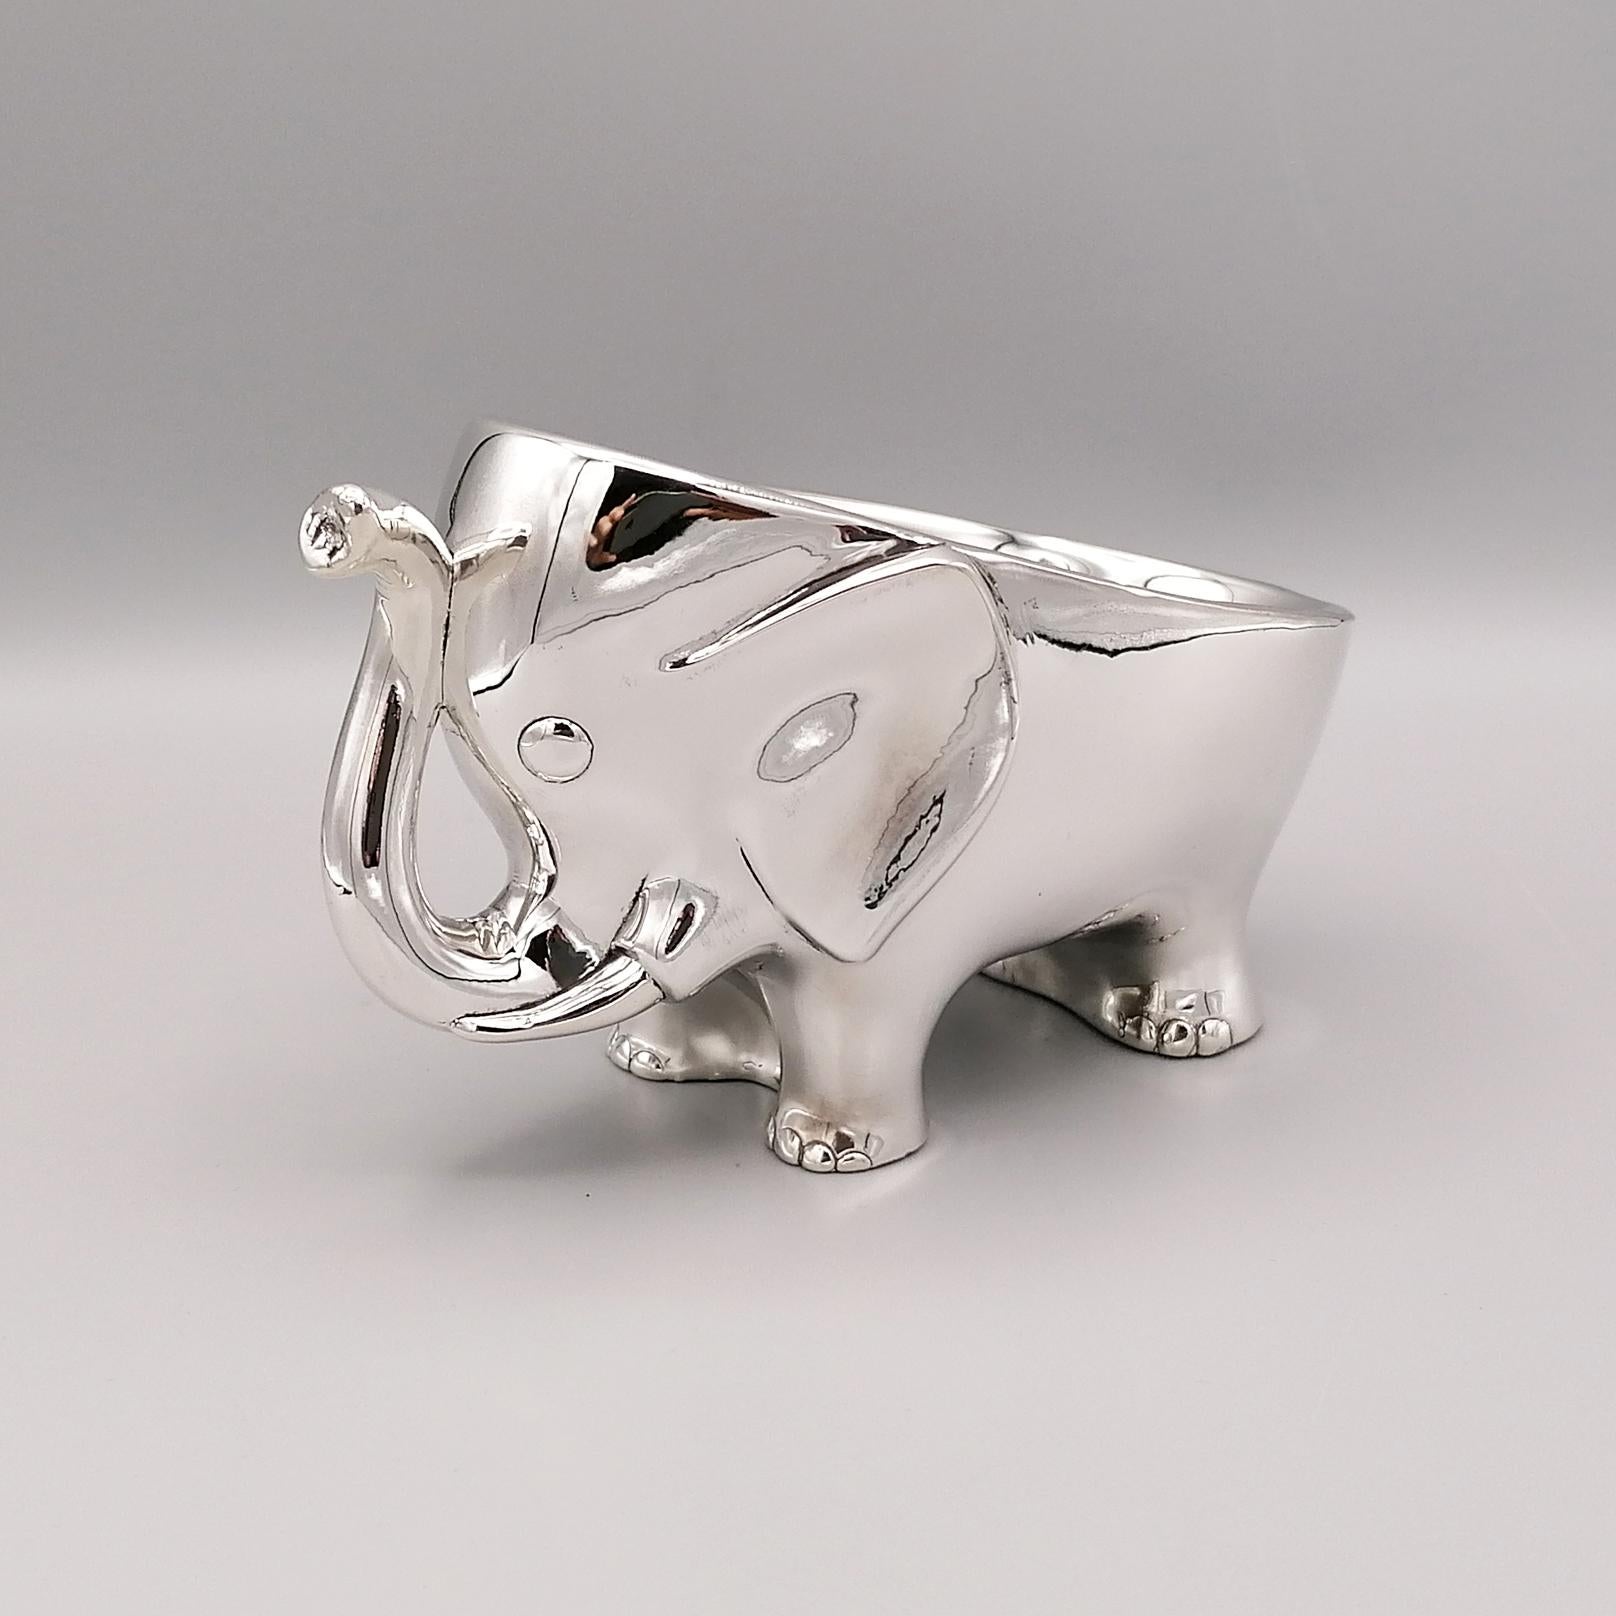 Hand-Crafted 20th Century Sterling Silver Stylized Elephant Shaped Soap / Candy Holder